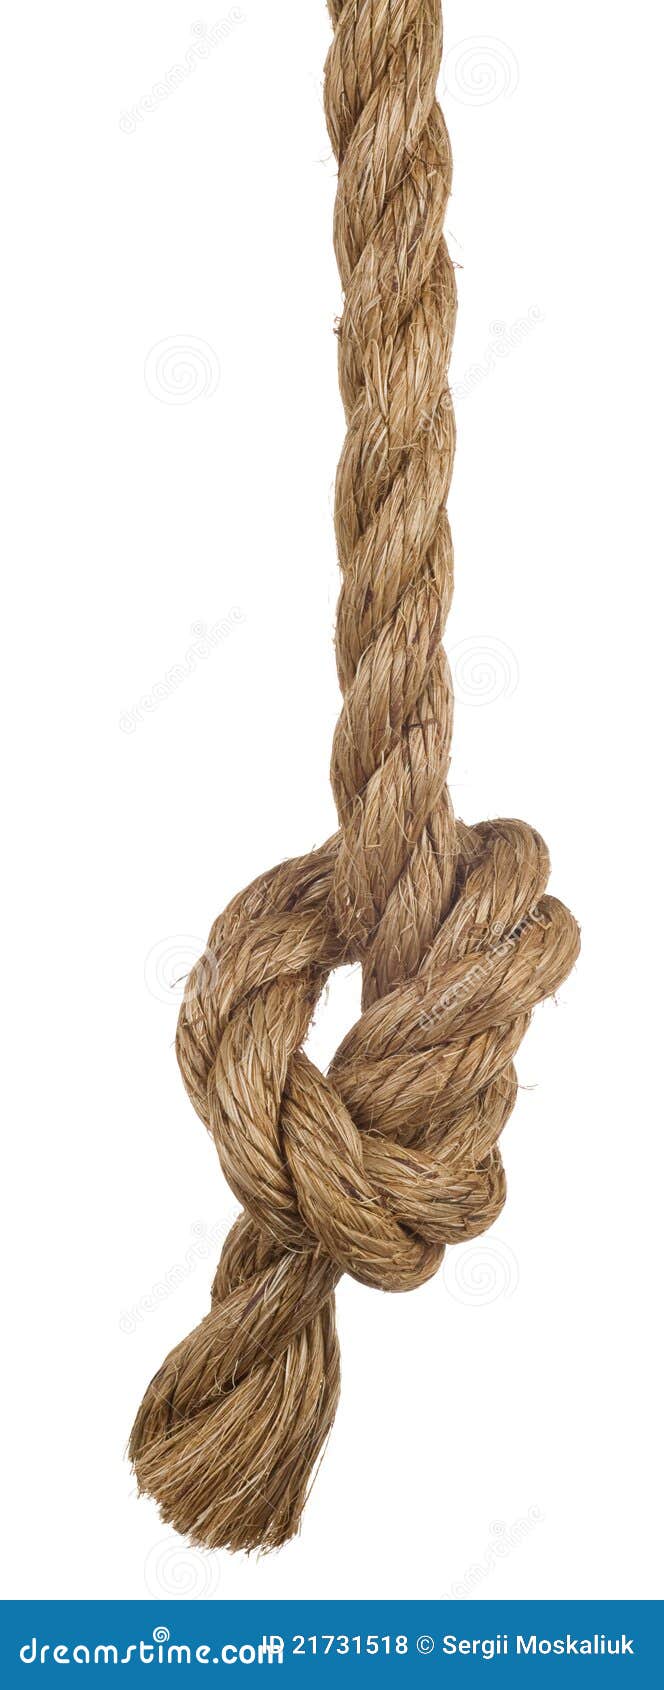 Ship rope with knot stock photo. Image of gibbet, copy - 21731518